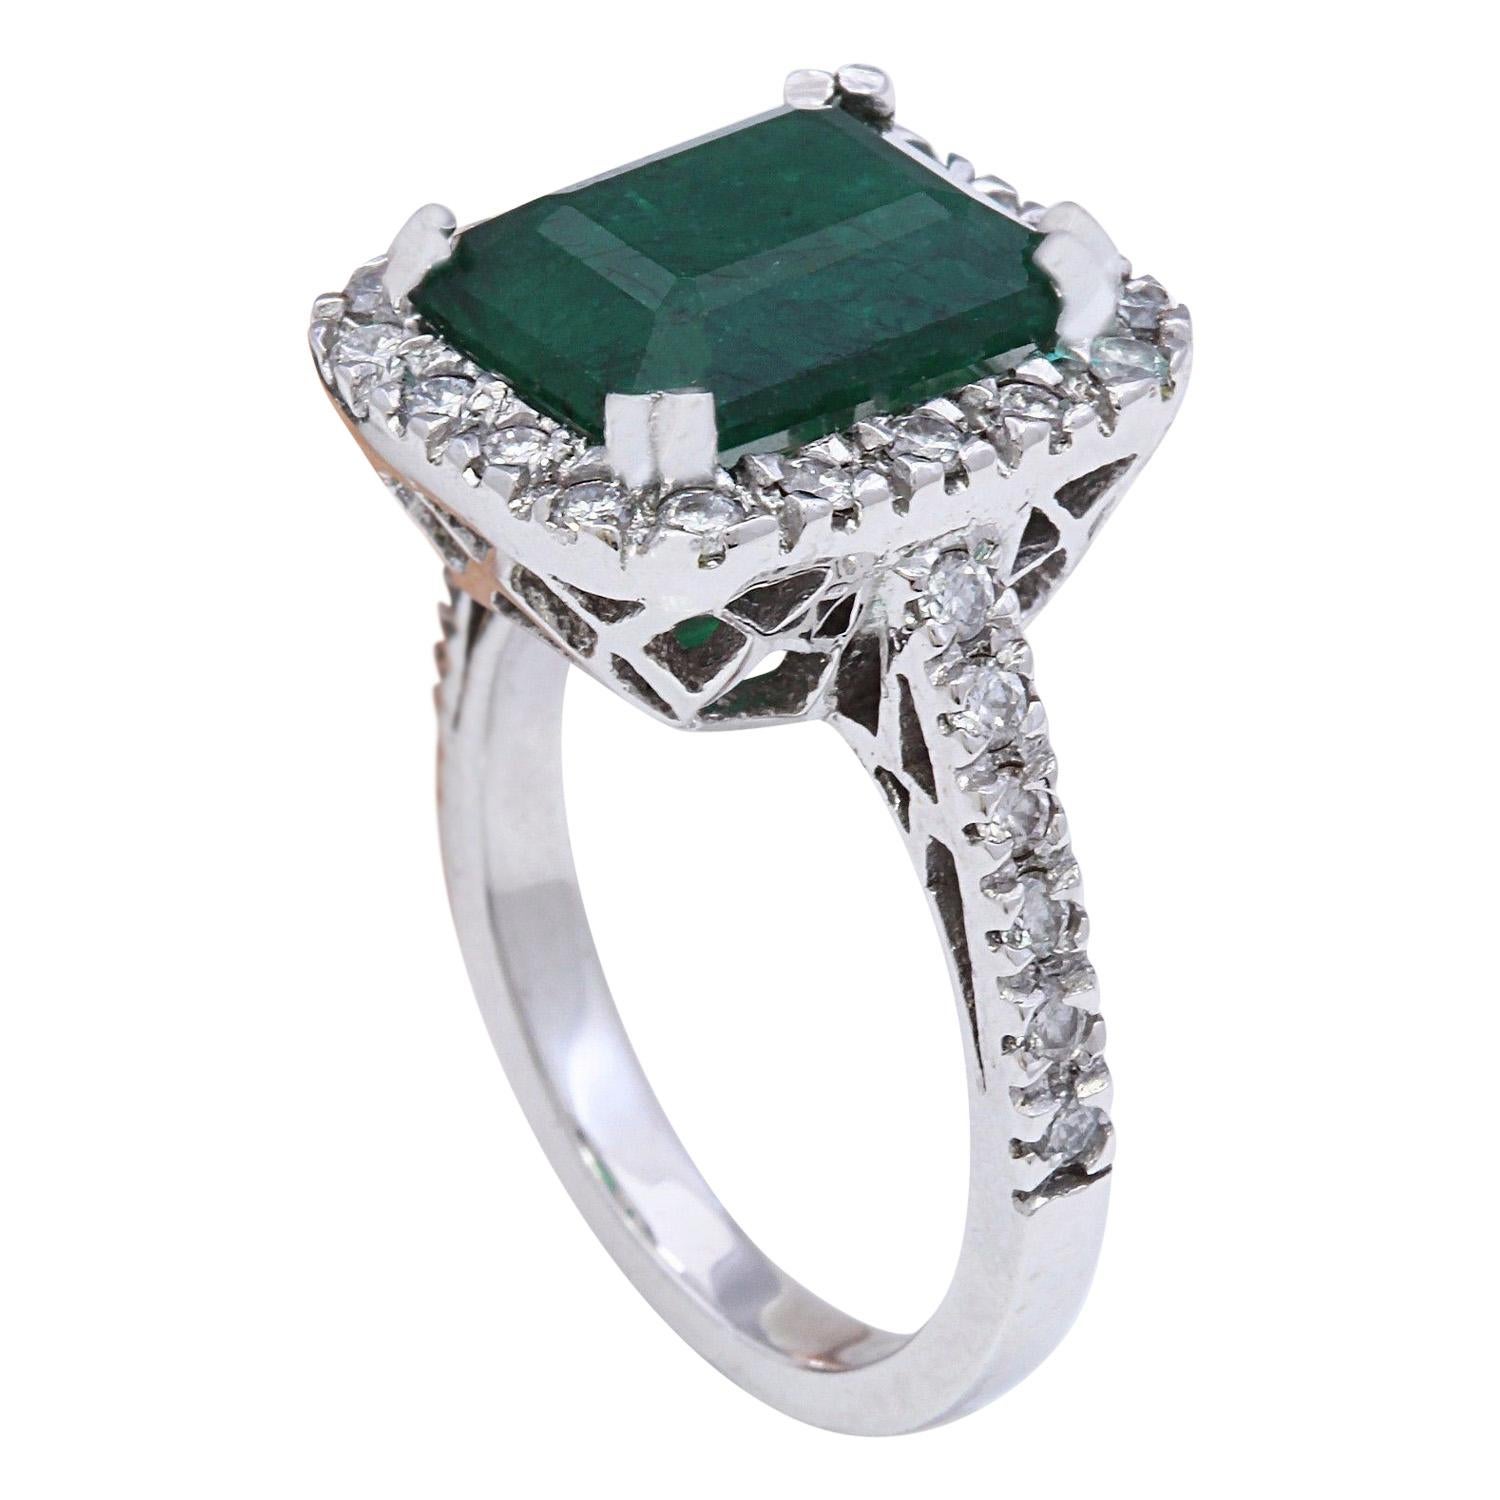 Emerald Cut Dazzling Natural Emerald Diamond Ring In 14 Karat Solid White Gold  For Sale